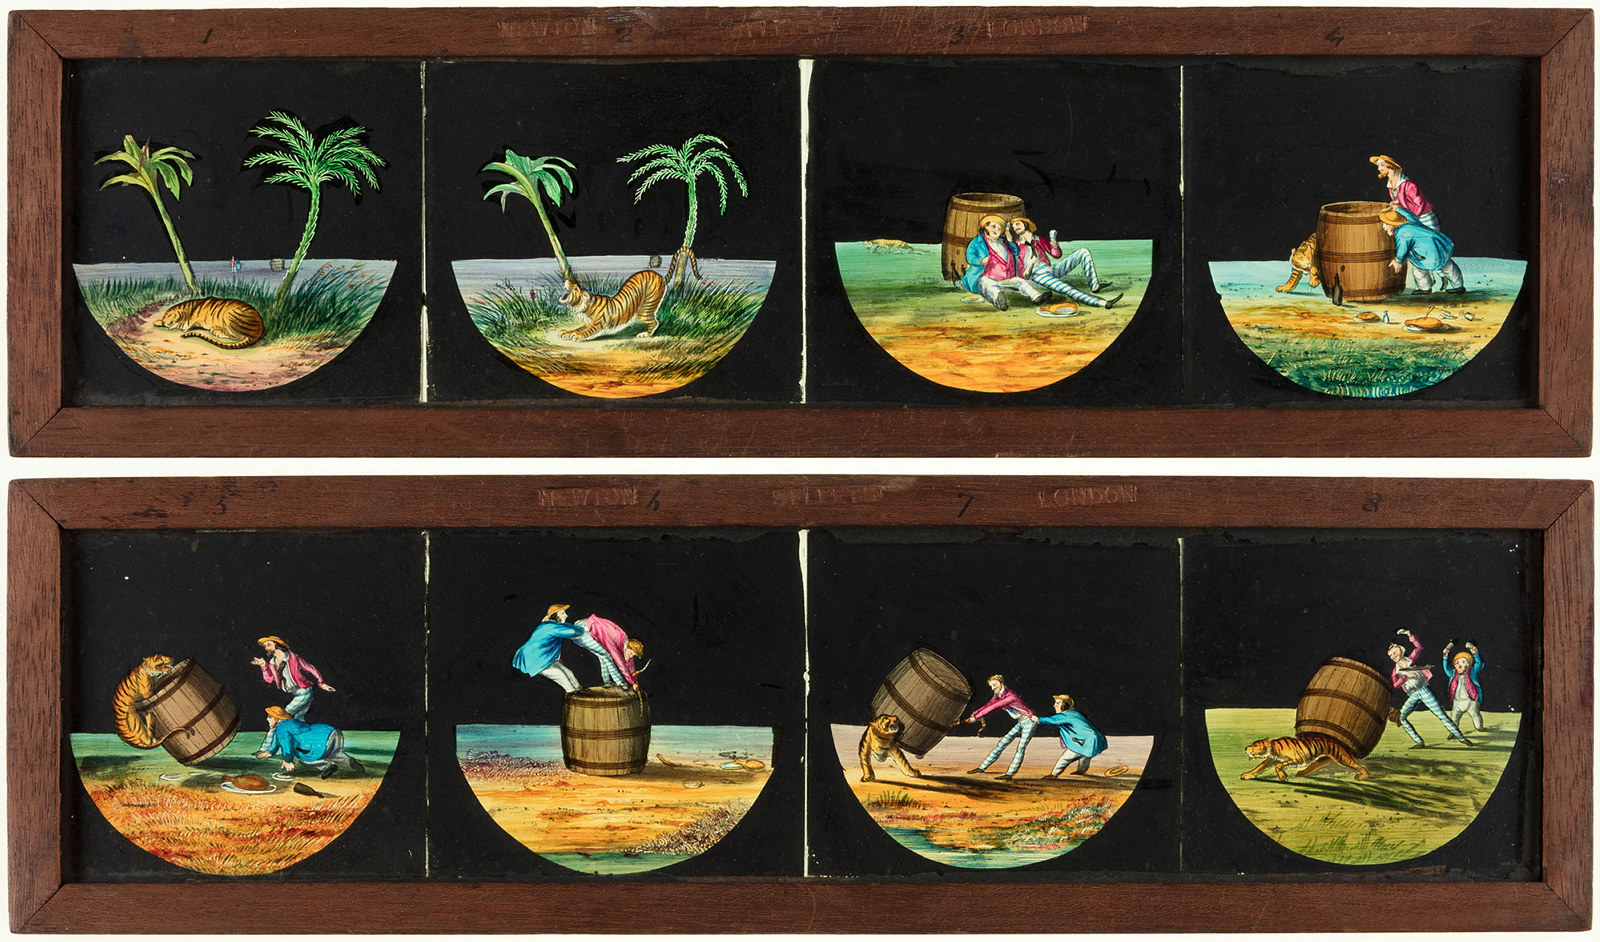 Two static, timber-framed glass slides for a magic lantern. These slides feature a sequence of individual hand-painted scenes of two men on a desert island with a tiger.